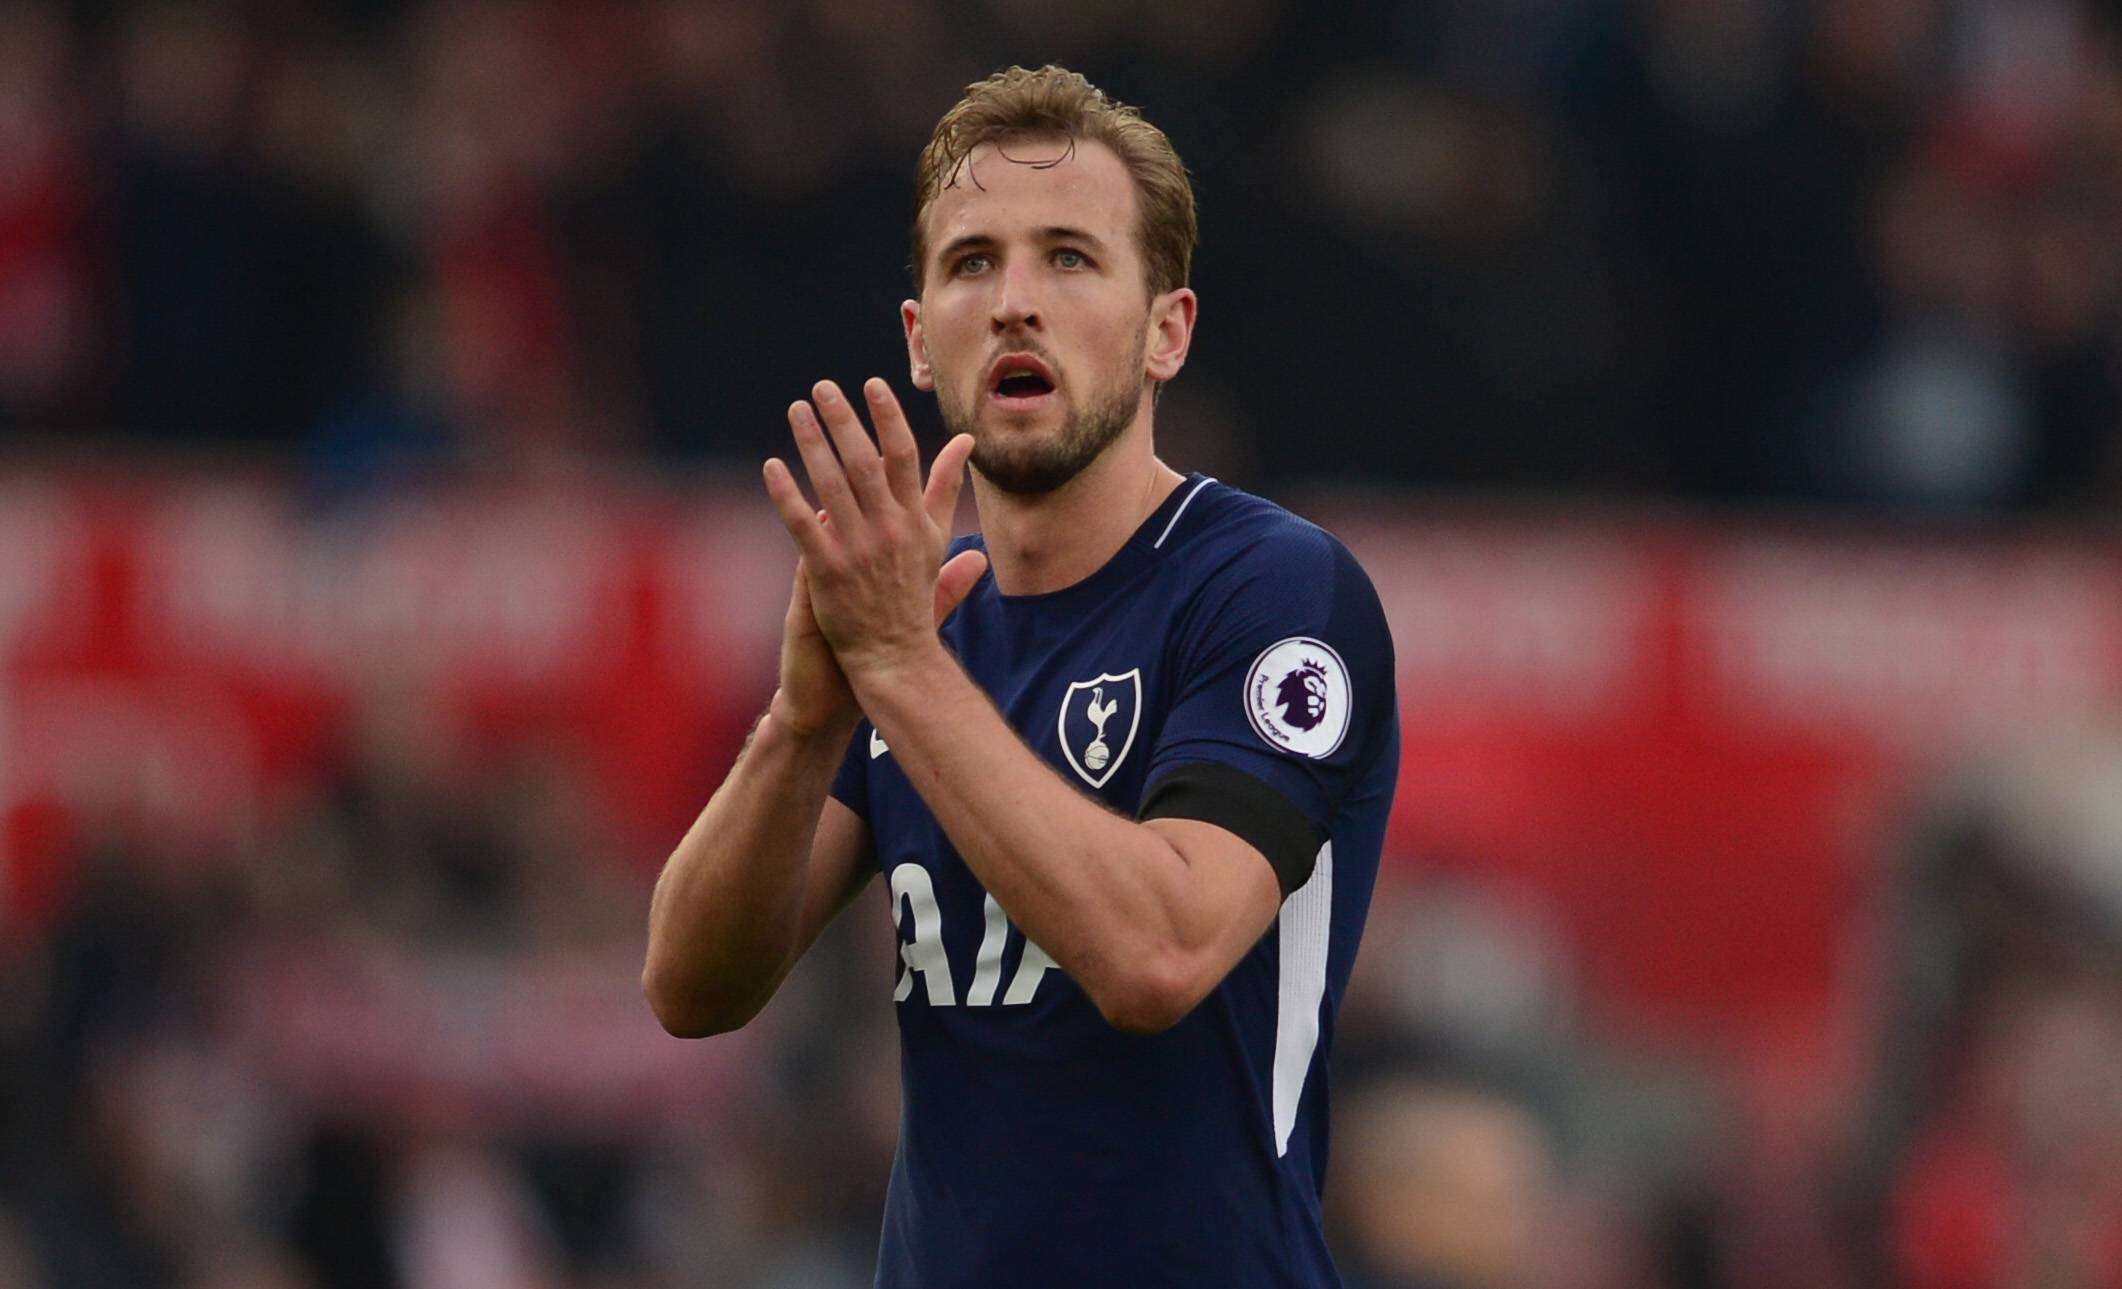 Transfer News: Chelsea to offer Romelu Lukaku plus cash for Harry Kane According to Calciomercatoweb (h/t Express), Chelsea are set to offer out-of-favour striker Romelu Lukaku plus cash to Premier League rivals Tottenham Hotspur, to try and entice English superstar Harry Kane to move to Stamford Bridge next season. The Belgian striker who had such an awful season at Chelsea last season was sent out on loan to Inter Milan after having fallen out with the coaches at the West London club. However, the Italian giants don't have a buy option for the Blues forward This means that there is a chance that the Belgian finds himself back in England at the start of next season and it seems like neither the Blues nor the player are keen on the reunion. Romelu Lukaku does not have a future at Chelsea(bPhoto by VIRGINIE LEFOUR / BELGA MAG / Belga via AFP) (Photo by VIRGINIE LEFOUR/BELGA MAG/AFP via Getty Images) Chelsea, for much of the transfer window this season found themselves linked to a plethora of strikers but eventually had to settle down for former Arsenal superstar Pierre Emerick Aubameyang, signing the Gabonese international from Barcelona. As good as the 33-year-old striker is, there is no denying that the talented striker is just a short-gap solution and cannot be viewed as a long-term option. This means that Chelsea might have to look for a new striker next season, someone who can lead the line for the next few seasons. It has now emerged that one player who has been an early favourite for Graham Potter is Spurs superstar Harry Kane. The 29-year-old English striker is on top of his game right now and will be entering what are arguably the prime years of his career. Harry Kane is a name linked to Chelsea (Photo by Clive Mason/Getty Images) Until now, despite scoring so many goals for the Lilywhites over so many seasons, the English striker doesn’t have a trophy cabinet to boast of. At the age at which he finds himself, Kane will want to be at a place where he can stat-pad some trophies for his resume and there are not many places better than Chelsea to do that. Spurs fans were of the feeling that their star man will want to stay in North London considering that he was chasing the record of ‘most goals scored for a single club’ in the Premier League. However, now that the 29-year-old has beaten Sergio Aguero to it, he might be more open to a move away from the Lilywhites. More Chelsea News: Francis Benali gives his verdict on the late Chelsea bid for Romeo LaviaScott Sinclair is training with Chelsea to prepare for his next moveFabrizio Romano: Chelsea owner Todd Boehly wanted to sign Erling Haaland Ultimately, it seems extremely unlikely that Harry Kane will leave the Premier League. That said, a move away from Spurs doesnt sound ridiculous and the English striker could be a Chelsea striker soon .